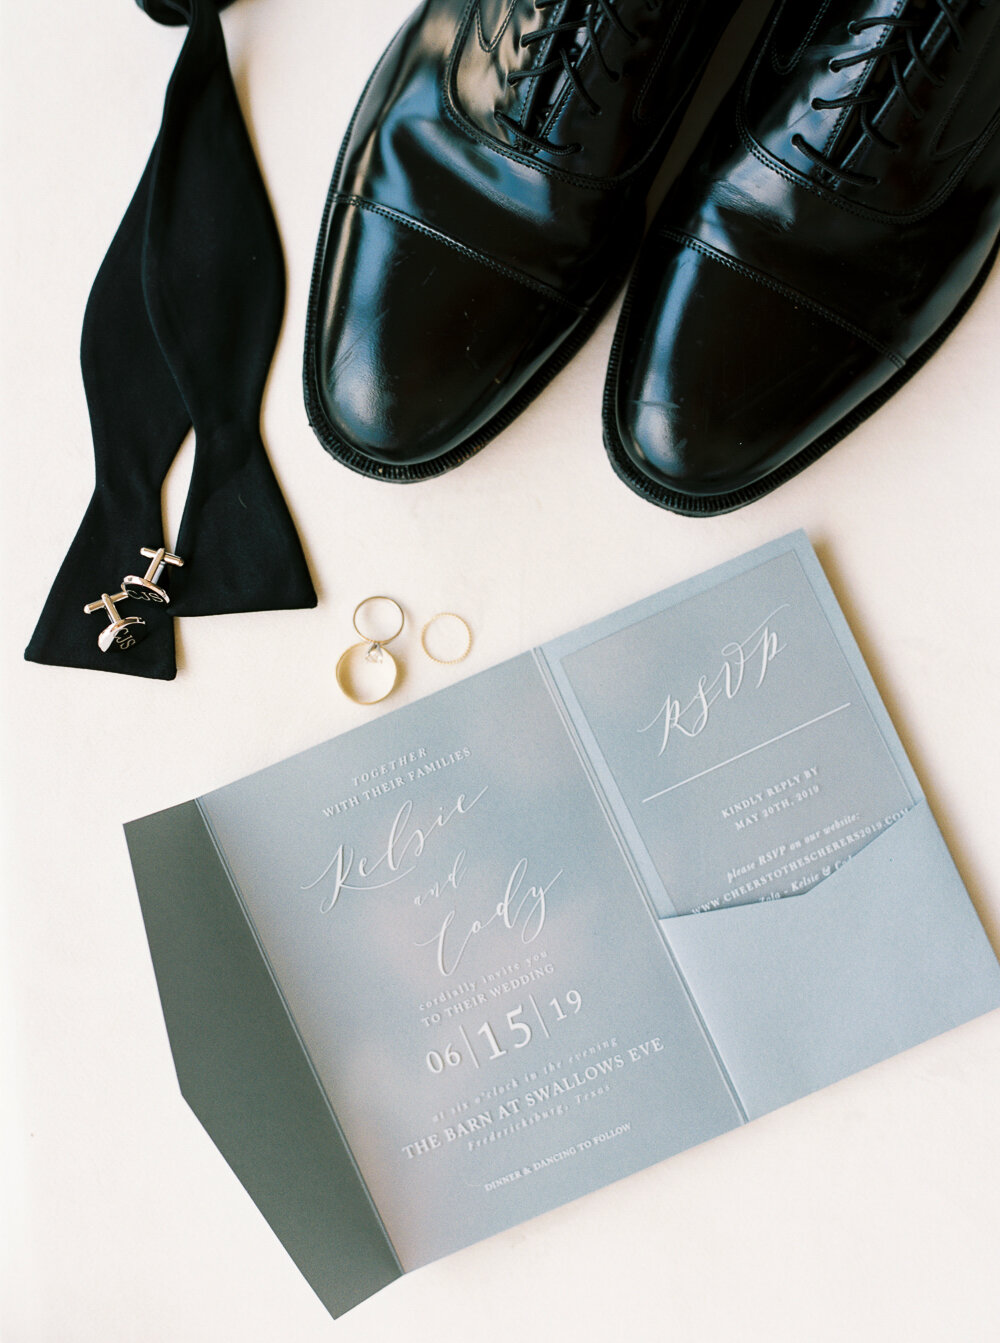 Flat Lay Styling by Courtney Leigh Photography, a Fine Art Film Photographer based in Houston, TX